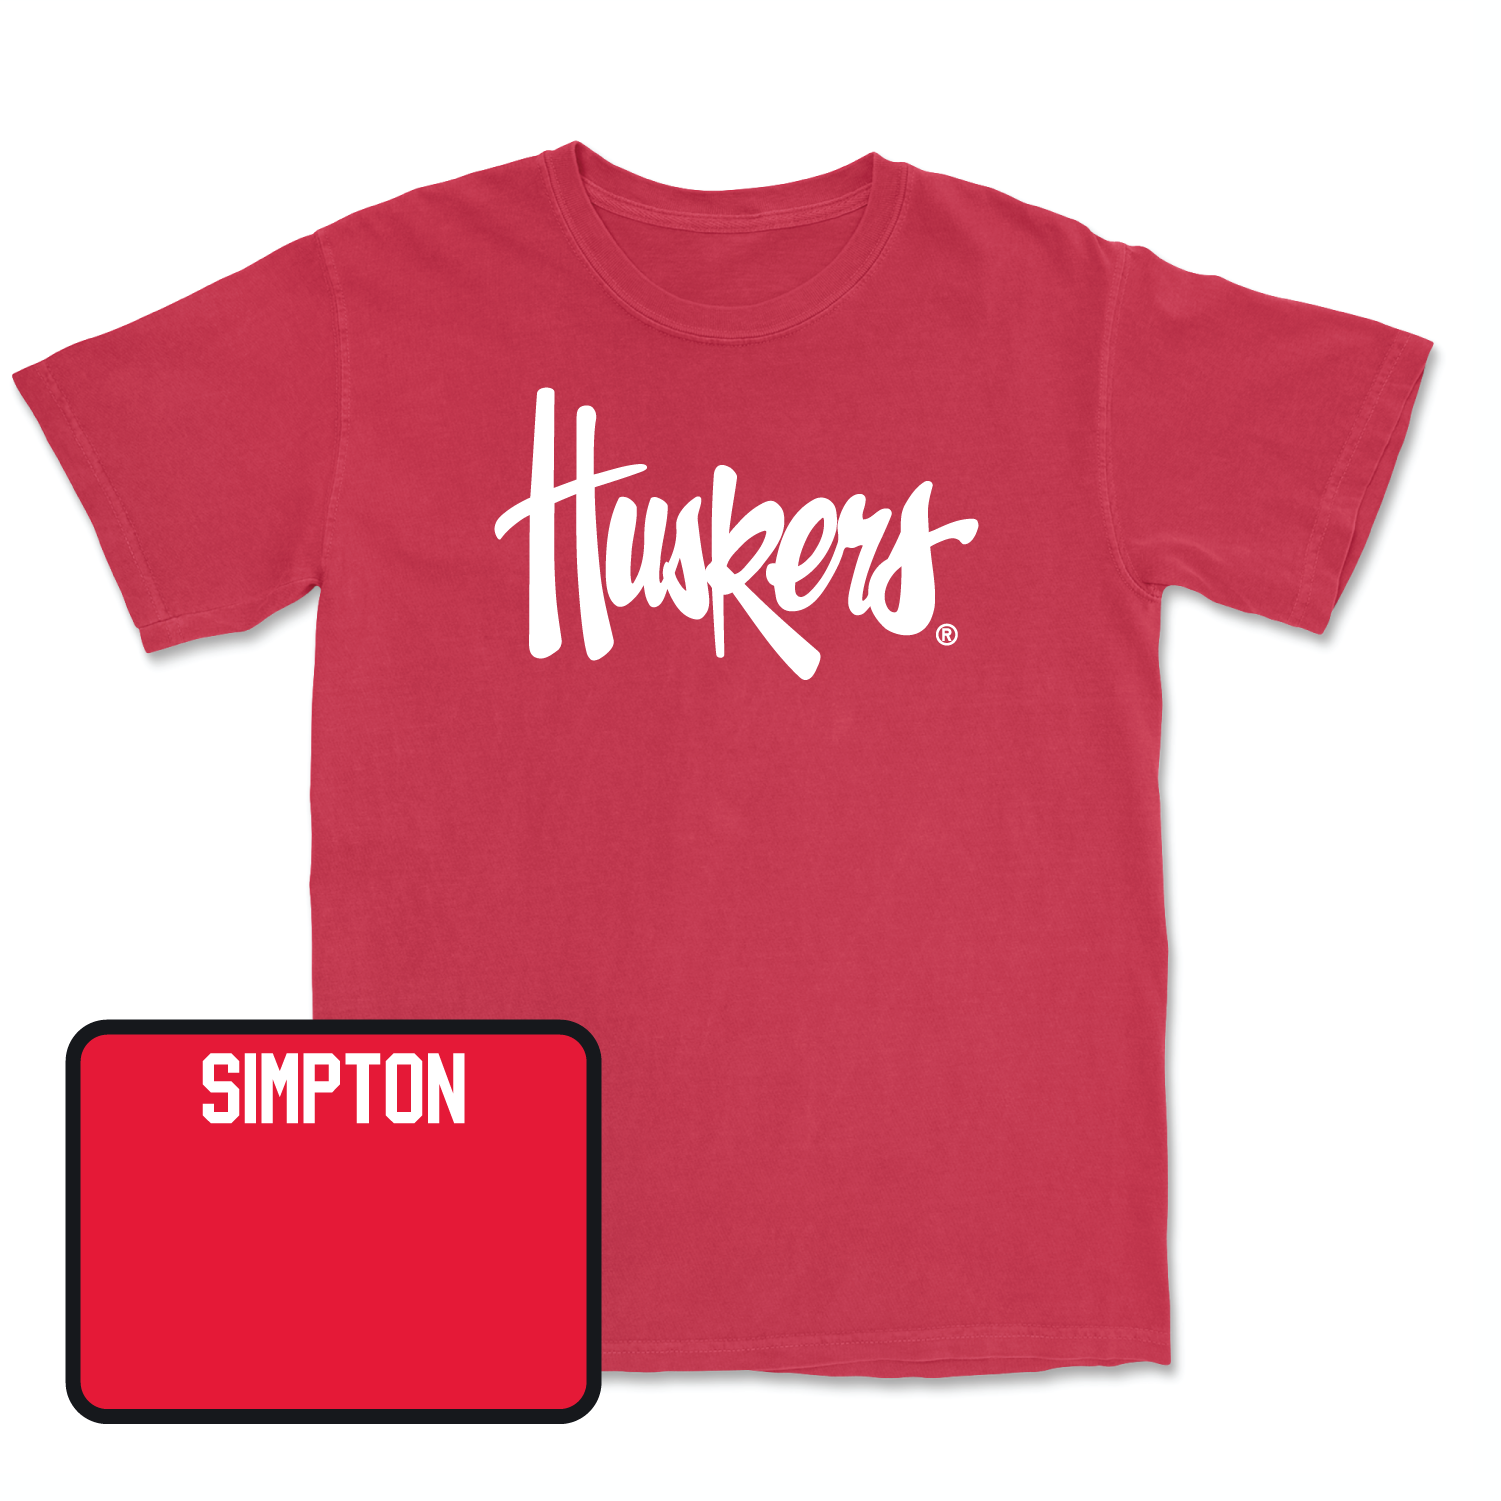 Red Women's Gymnastics Huskers Tee Youth Large / Emma Simpton